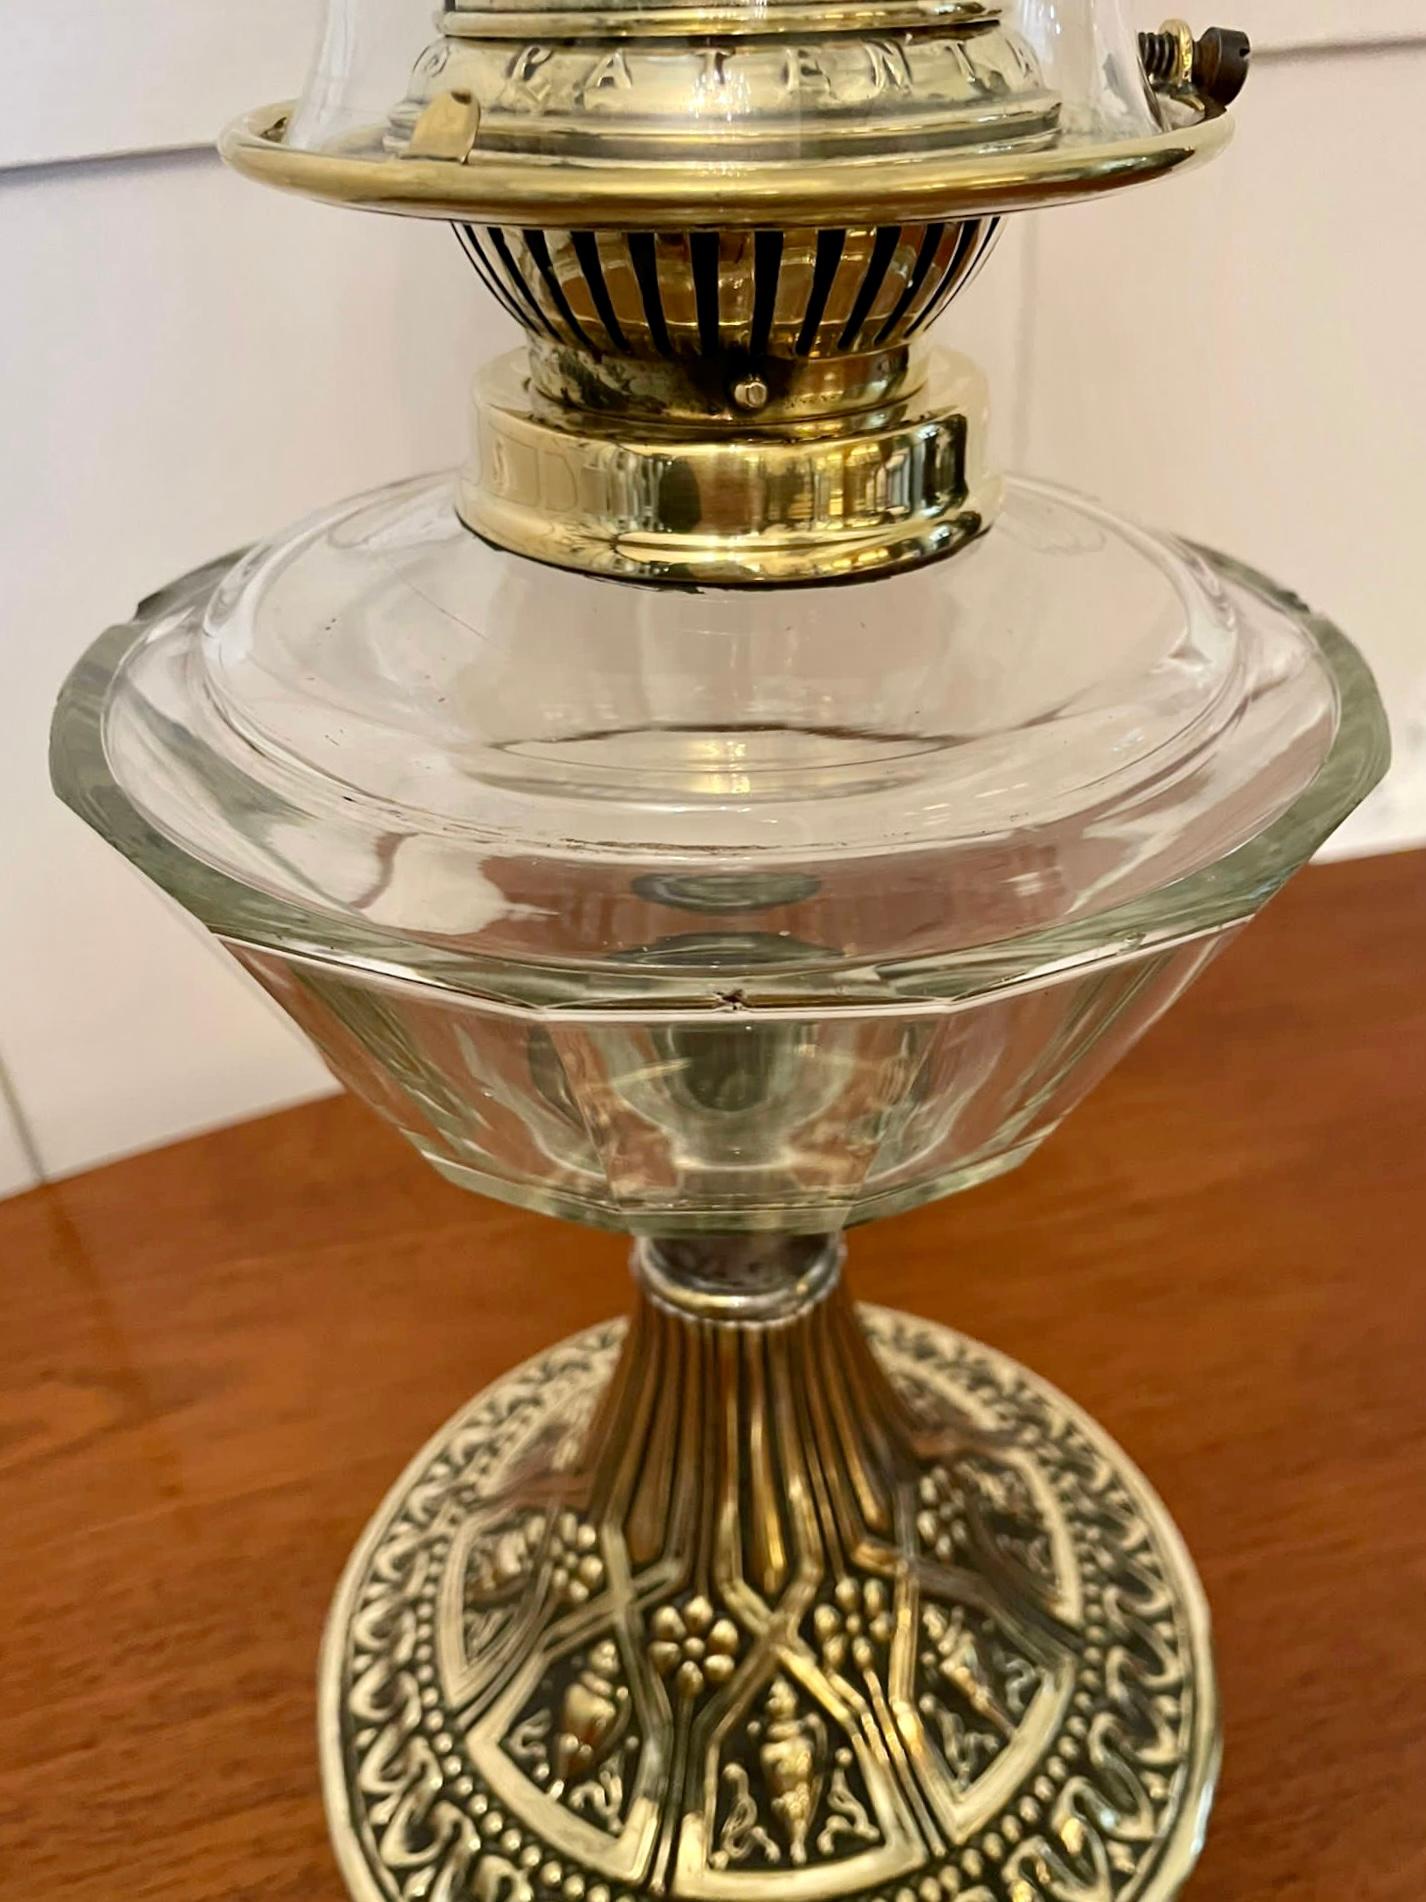 Unusual antique Victorian chimneyless ornate oil lamp having a delightful shaped etched glass shade and quality brass burner with a pretty shaped glass font above an ornate brass circular shaped stand. Small superficial chips to the back of the